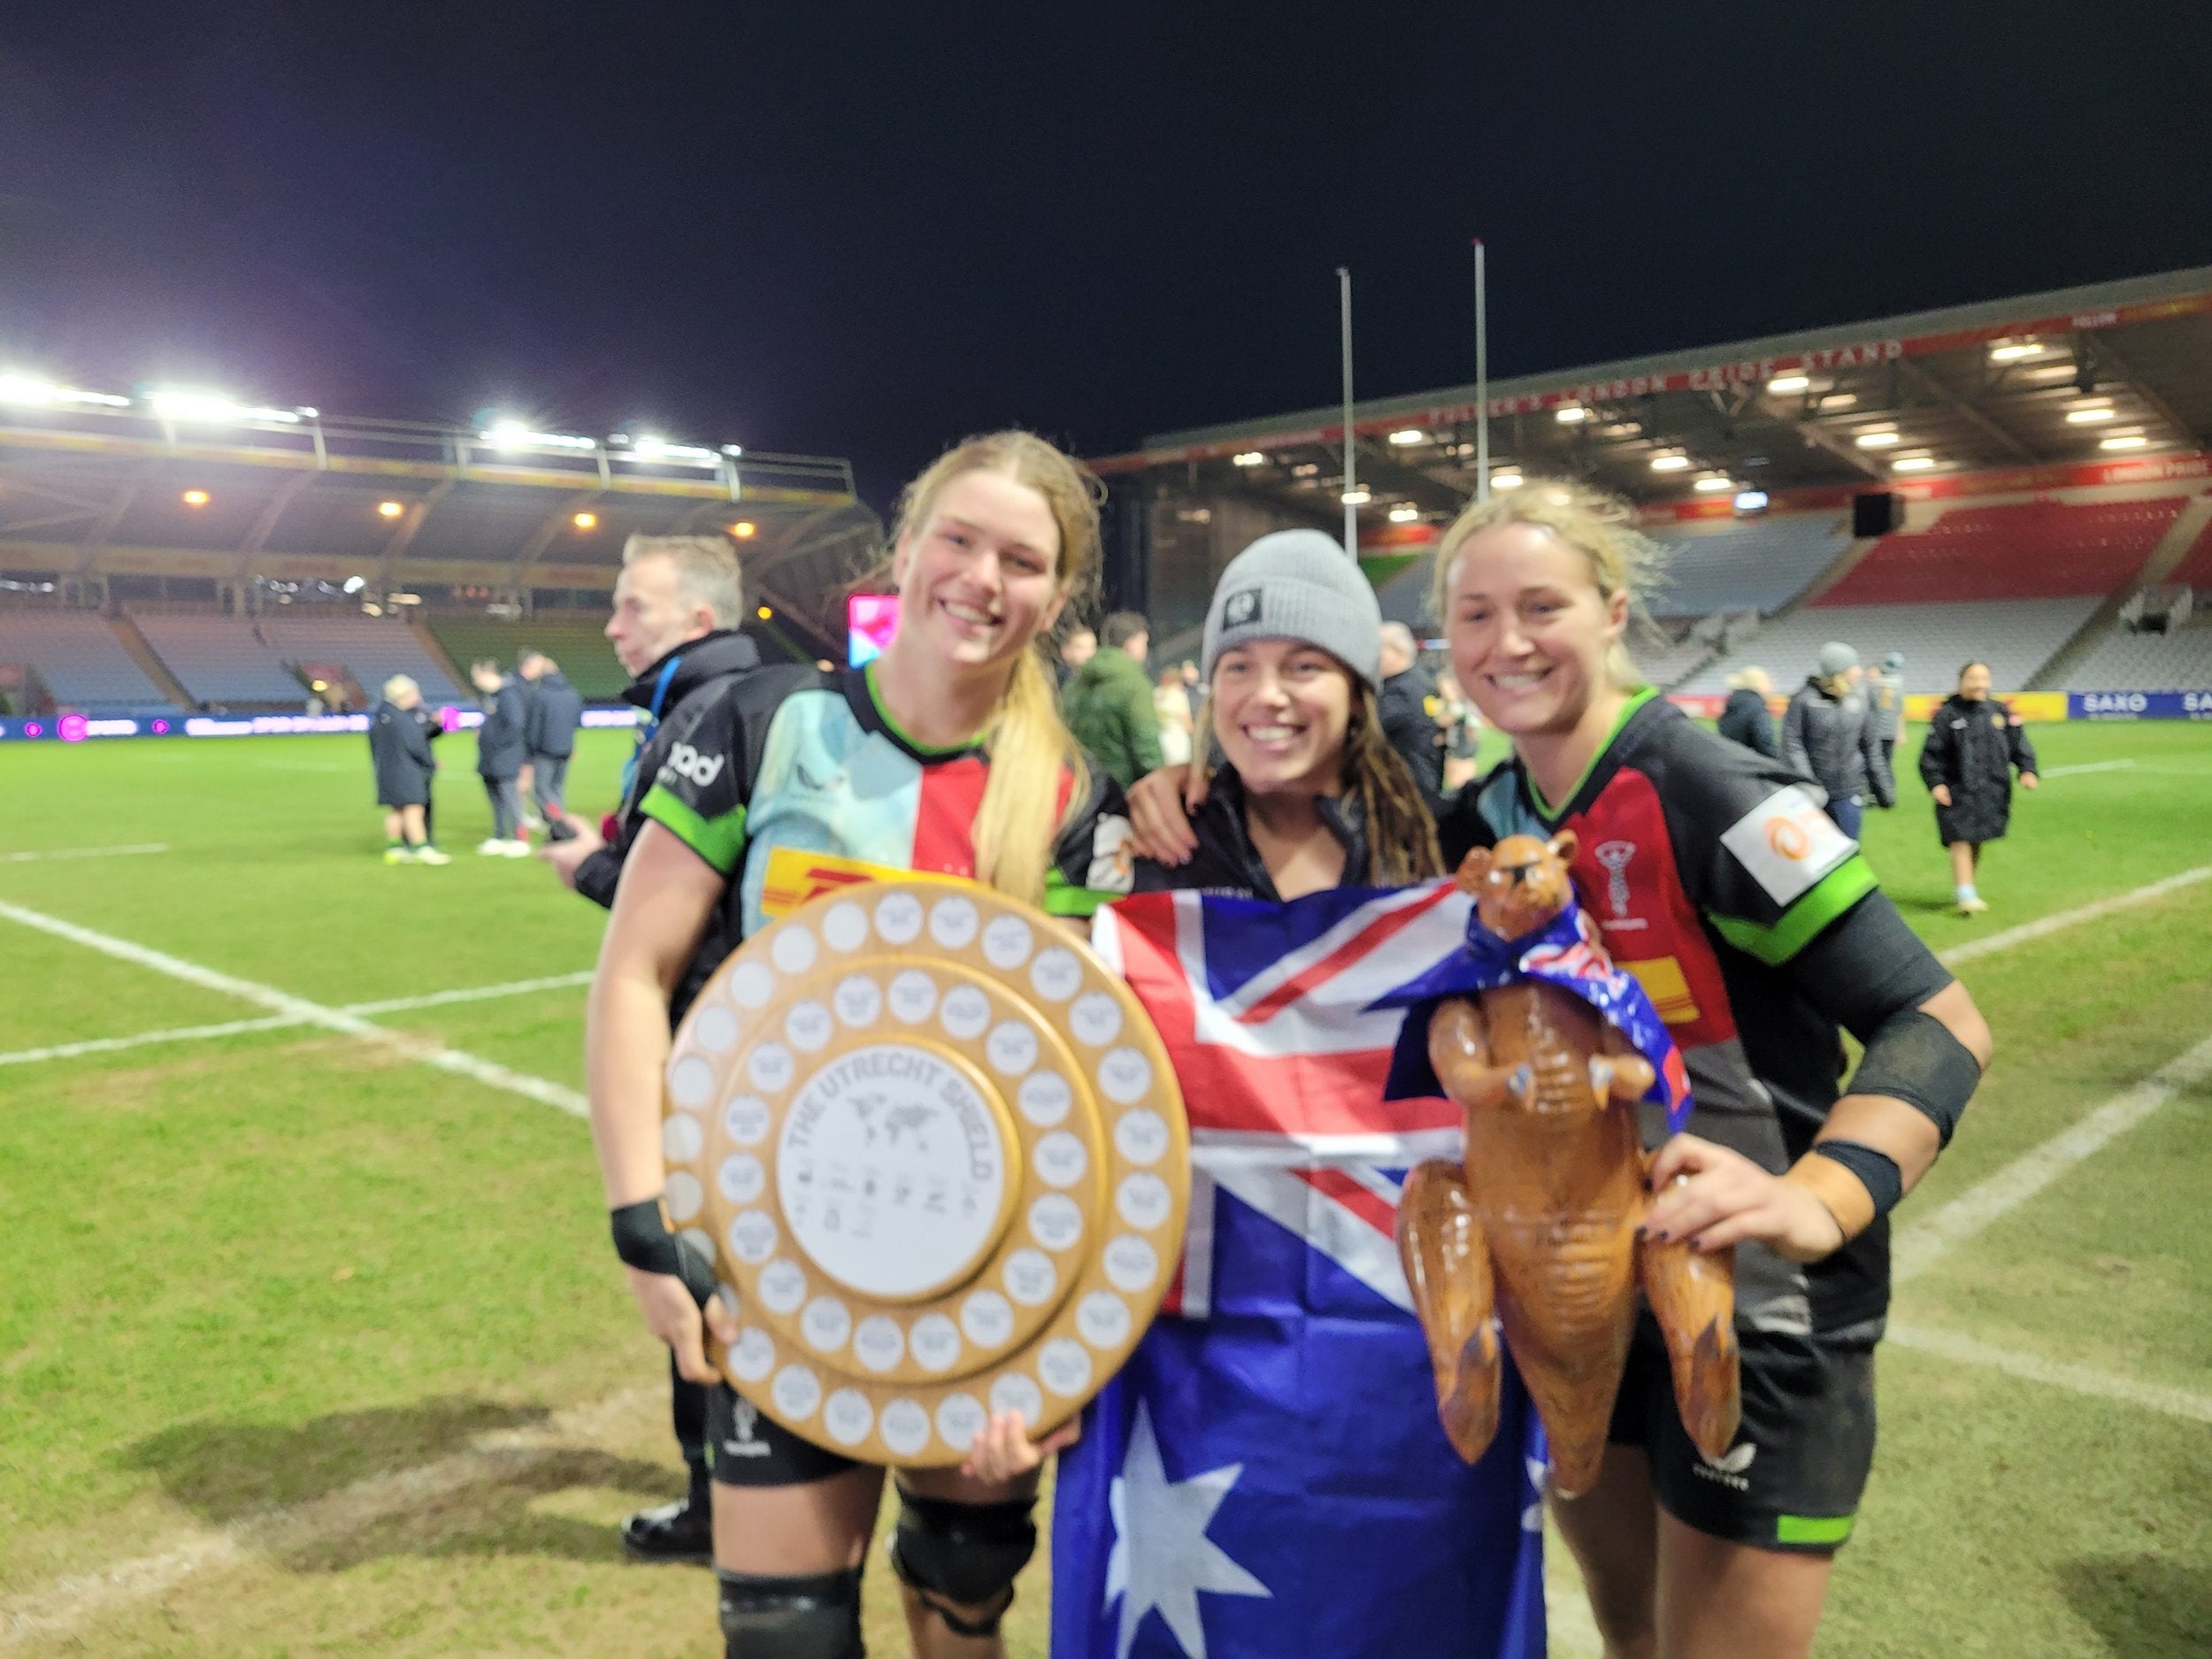 The Utrecht Shield - Celebrating over 40 years of women's International Rugby